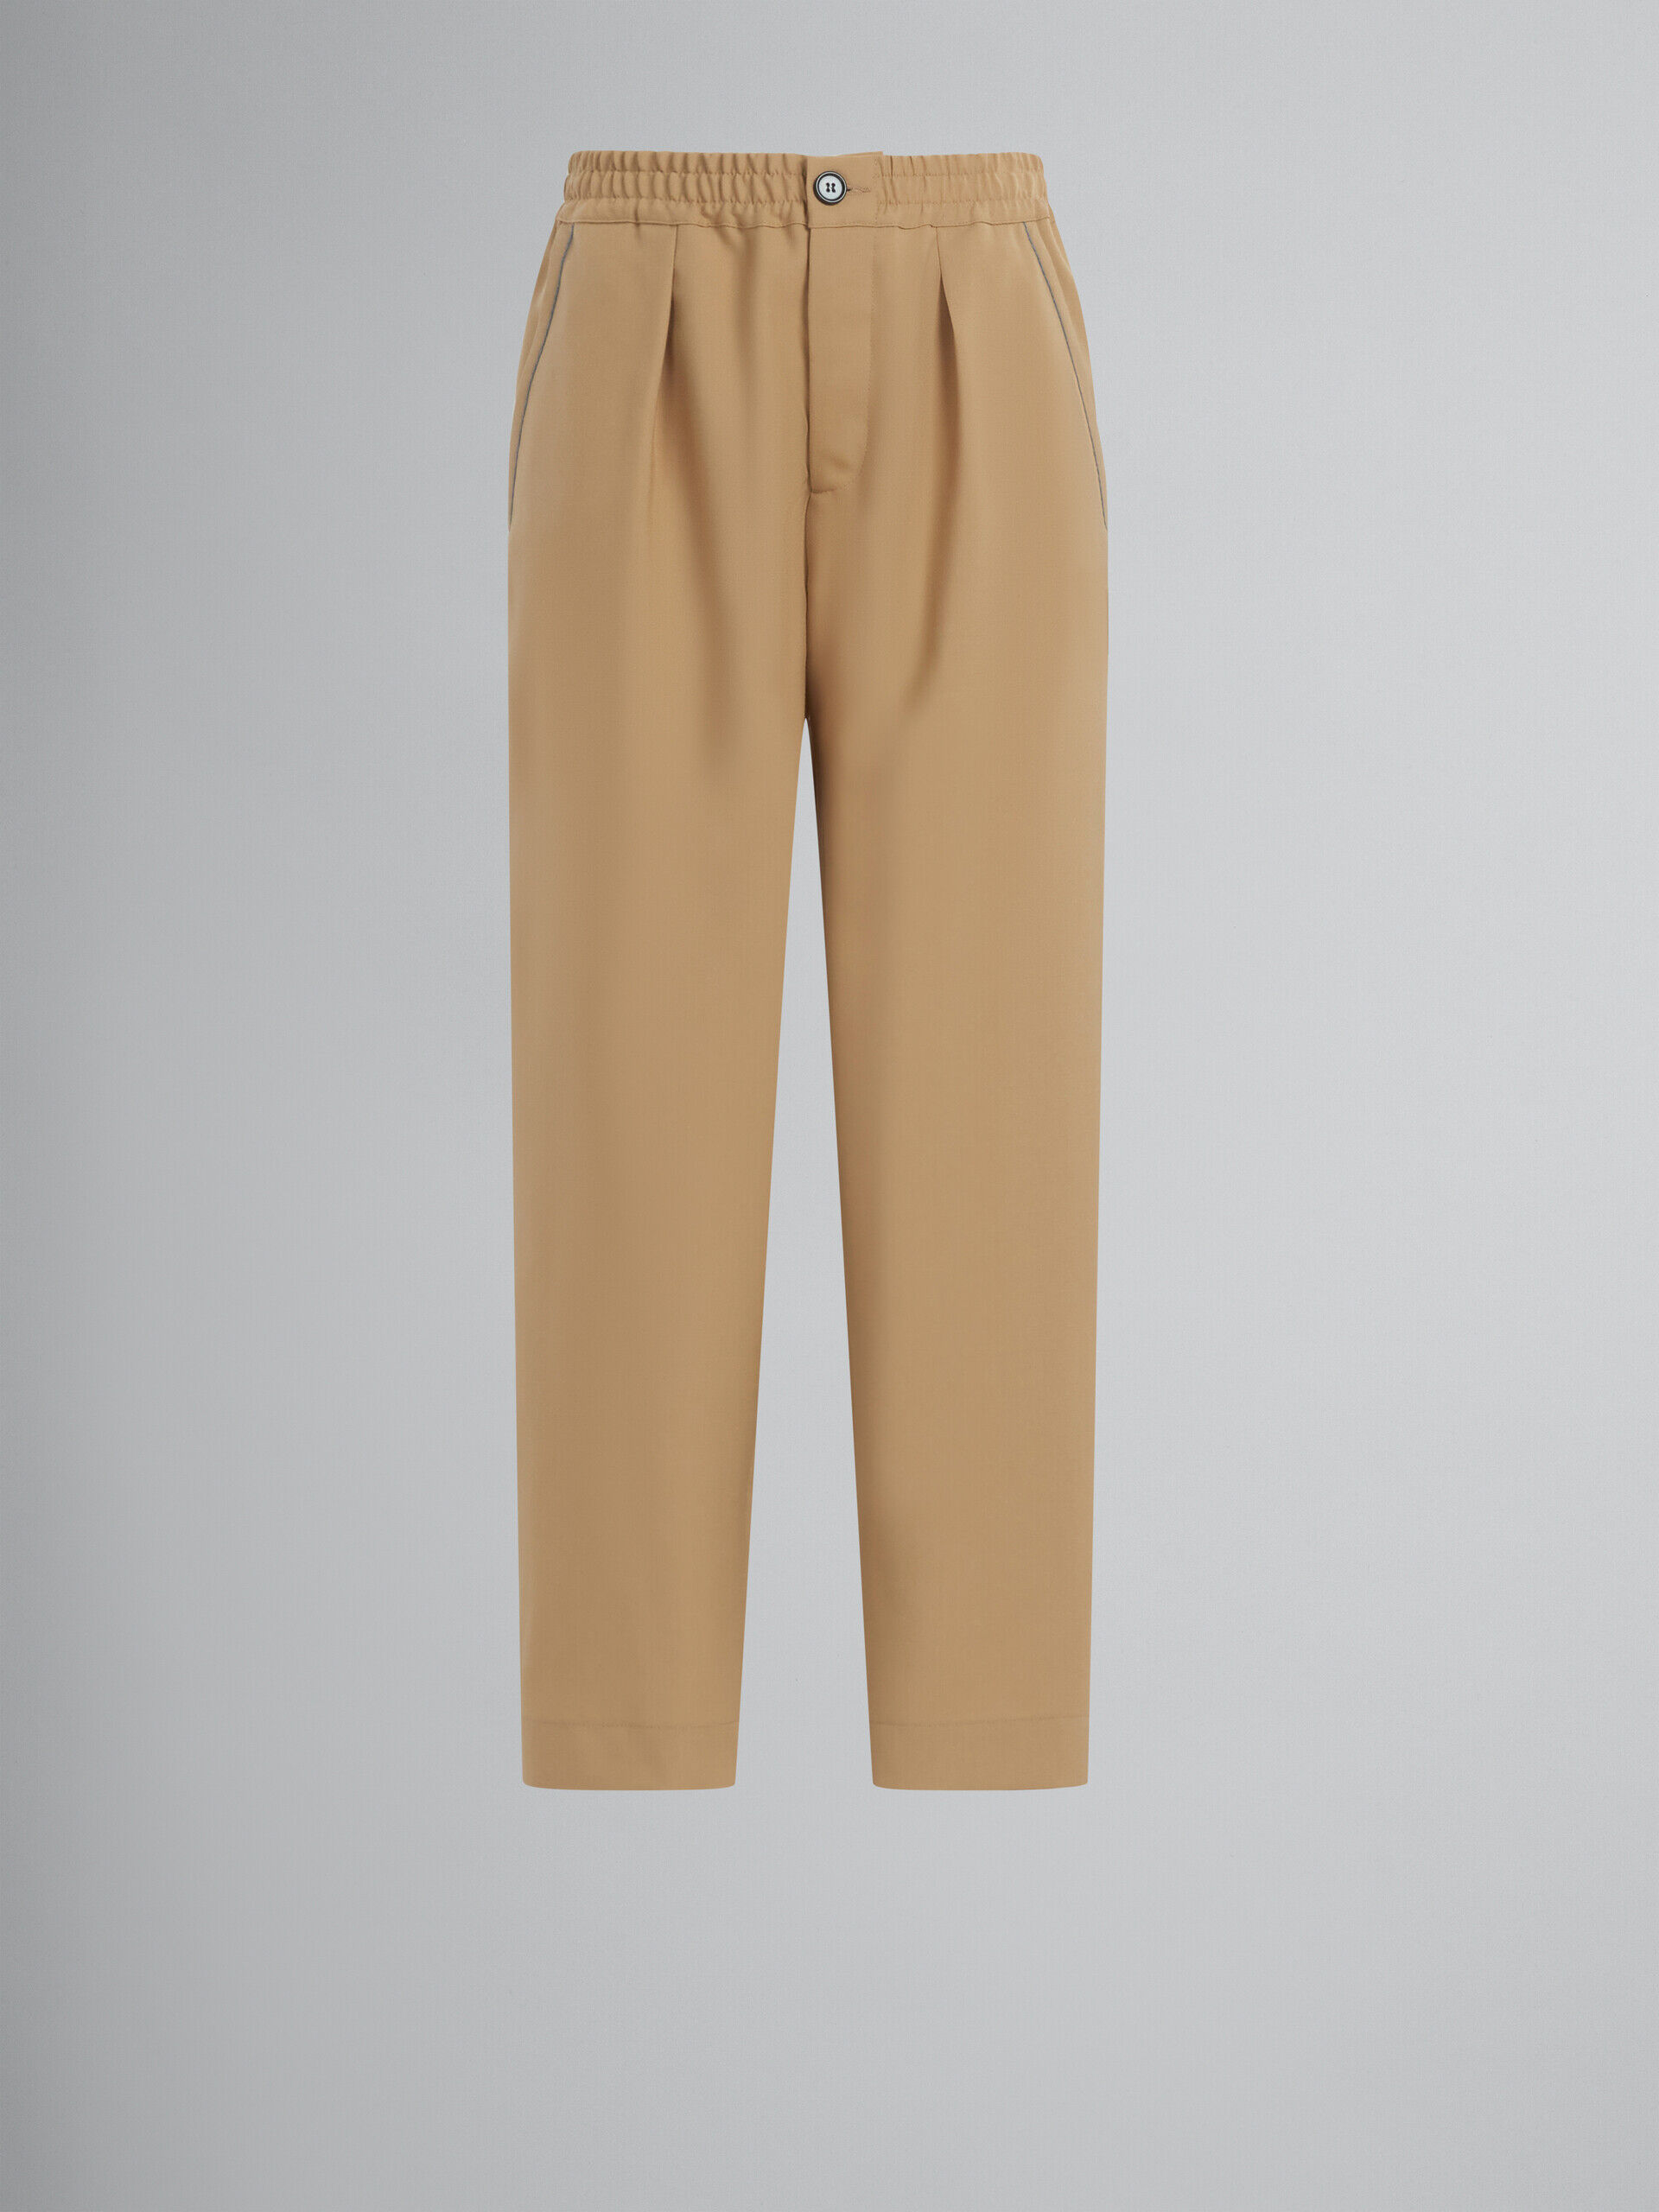 Cropped trousers in beige tropical wool | Marni